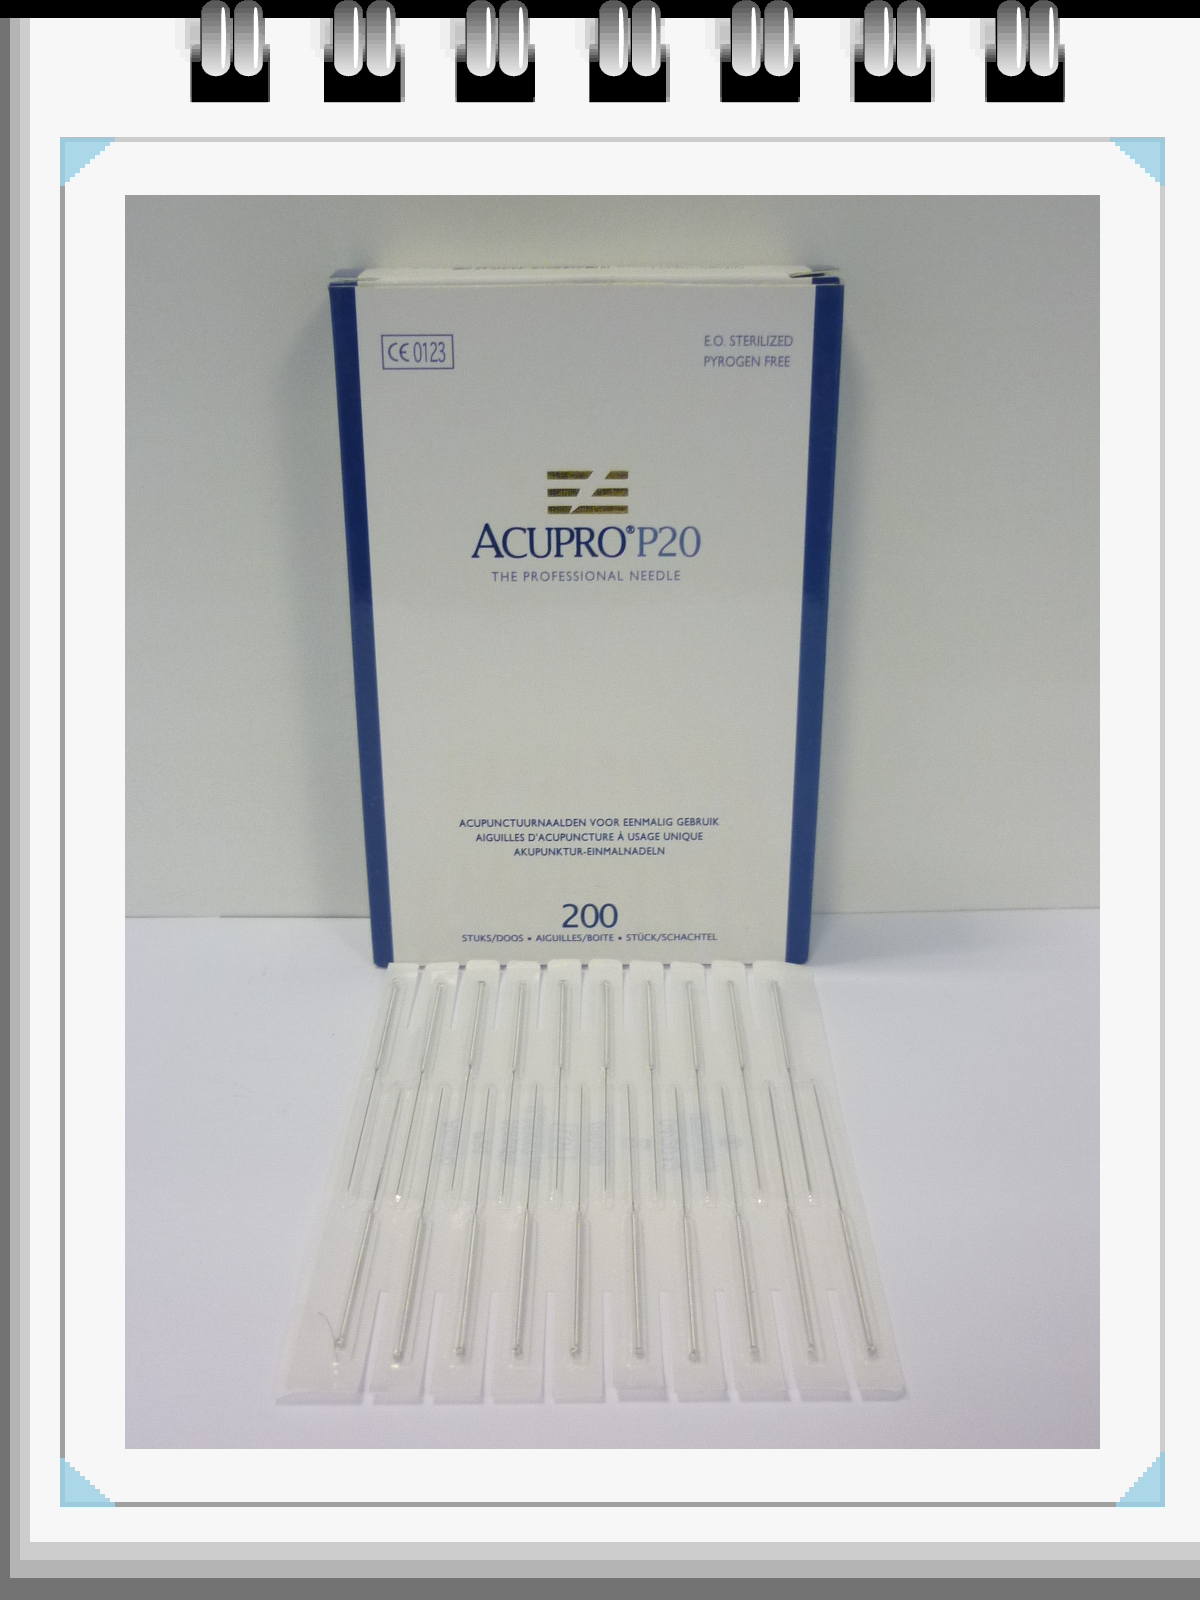 All Products - Acupunctuurnaalden 0,25 x 50mm per 200